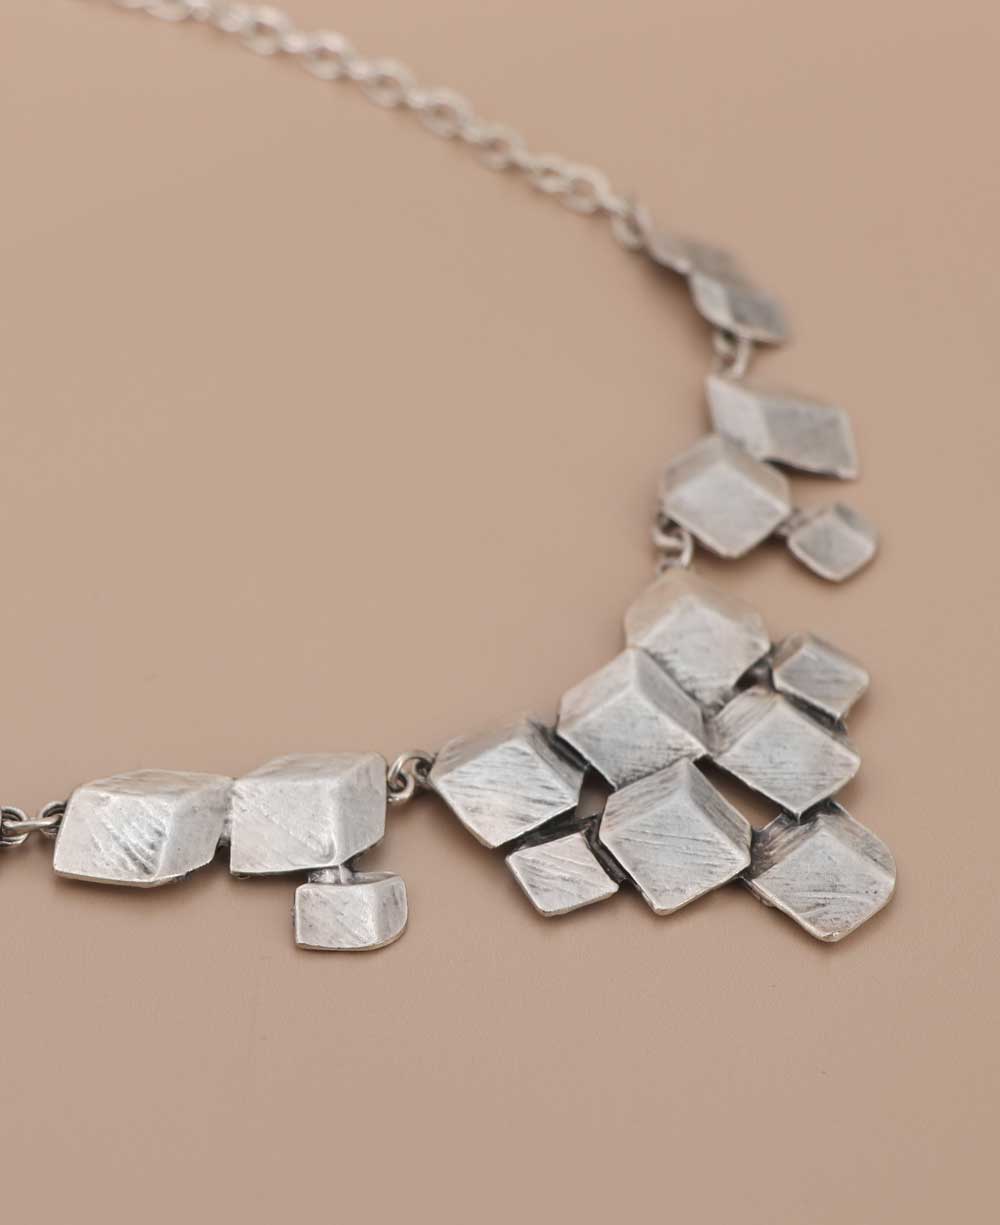 Textured surface artistic necklace